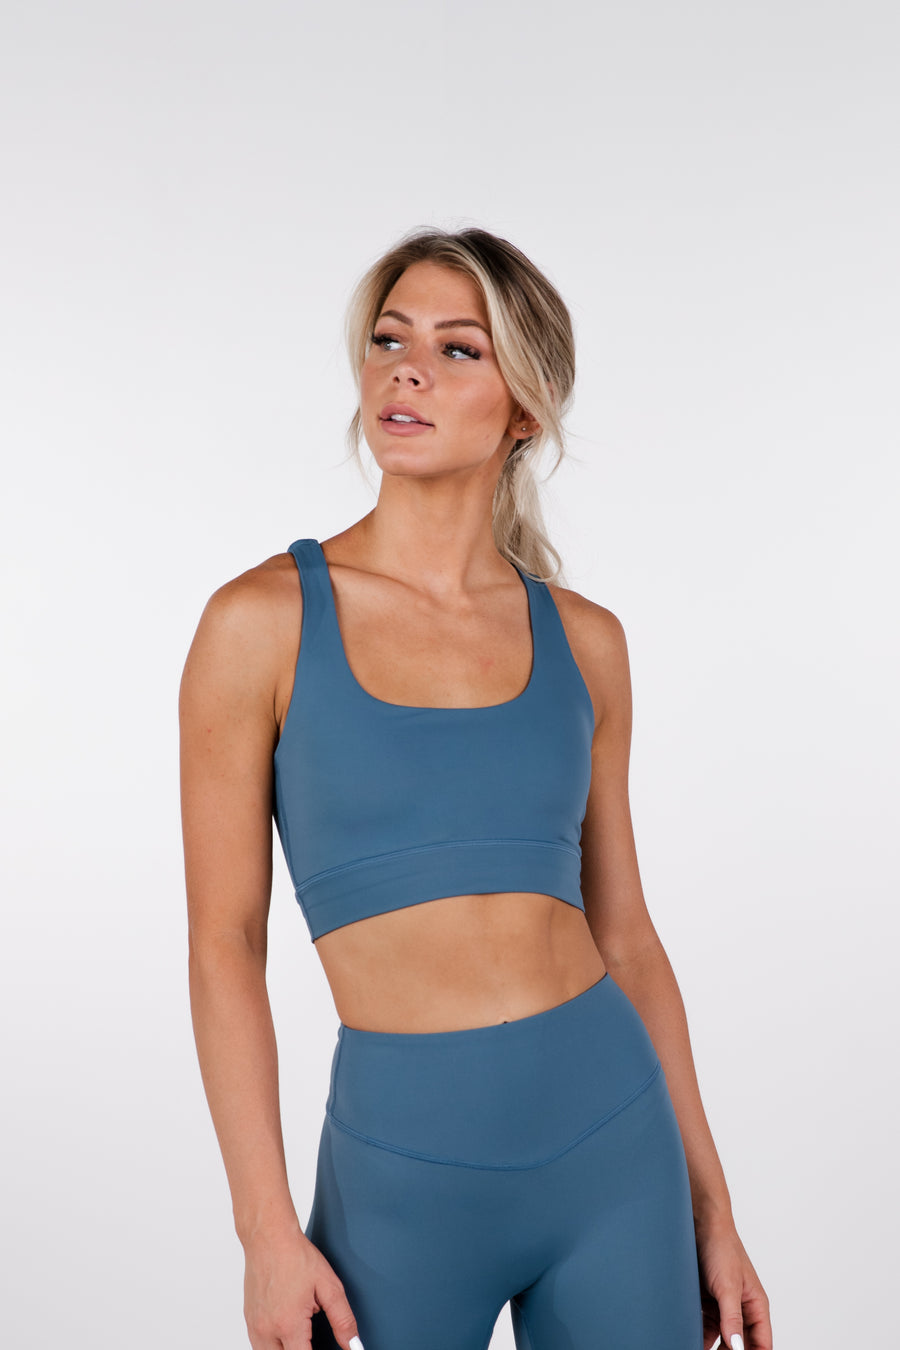 THE LIMITED EDITION SPORTS BRA